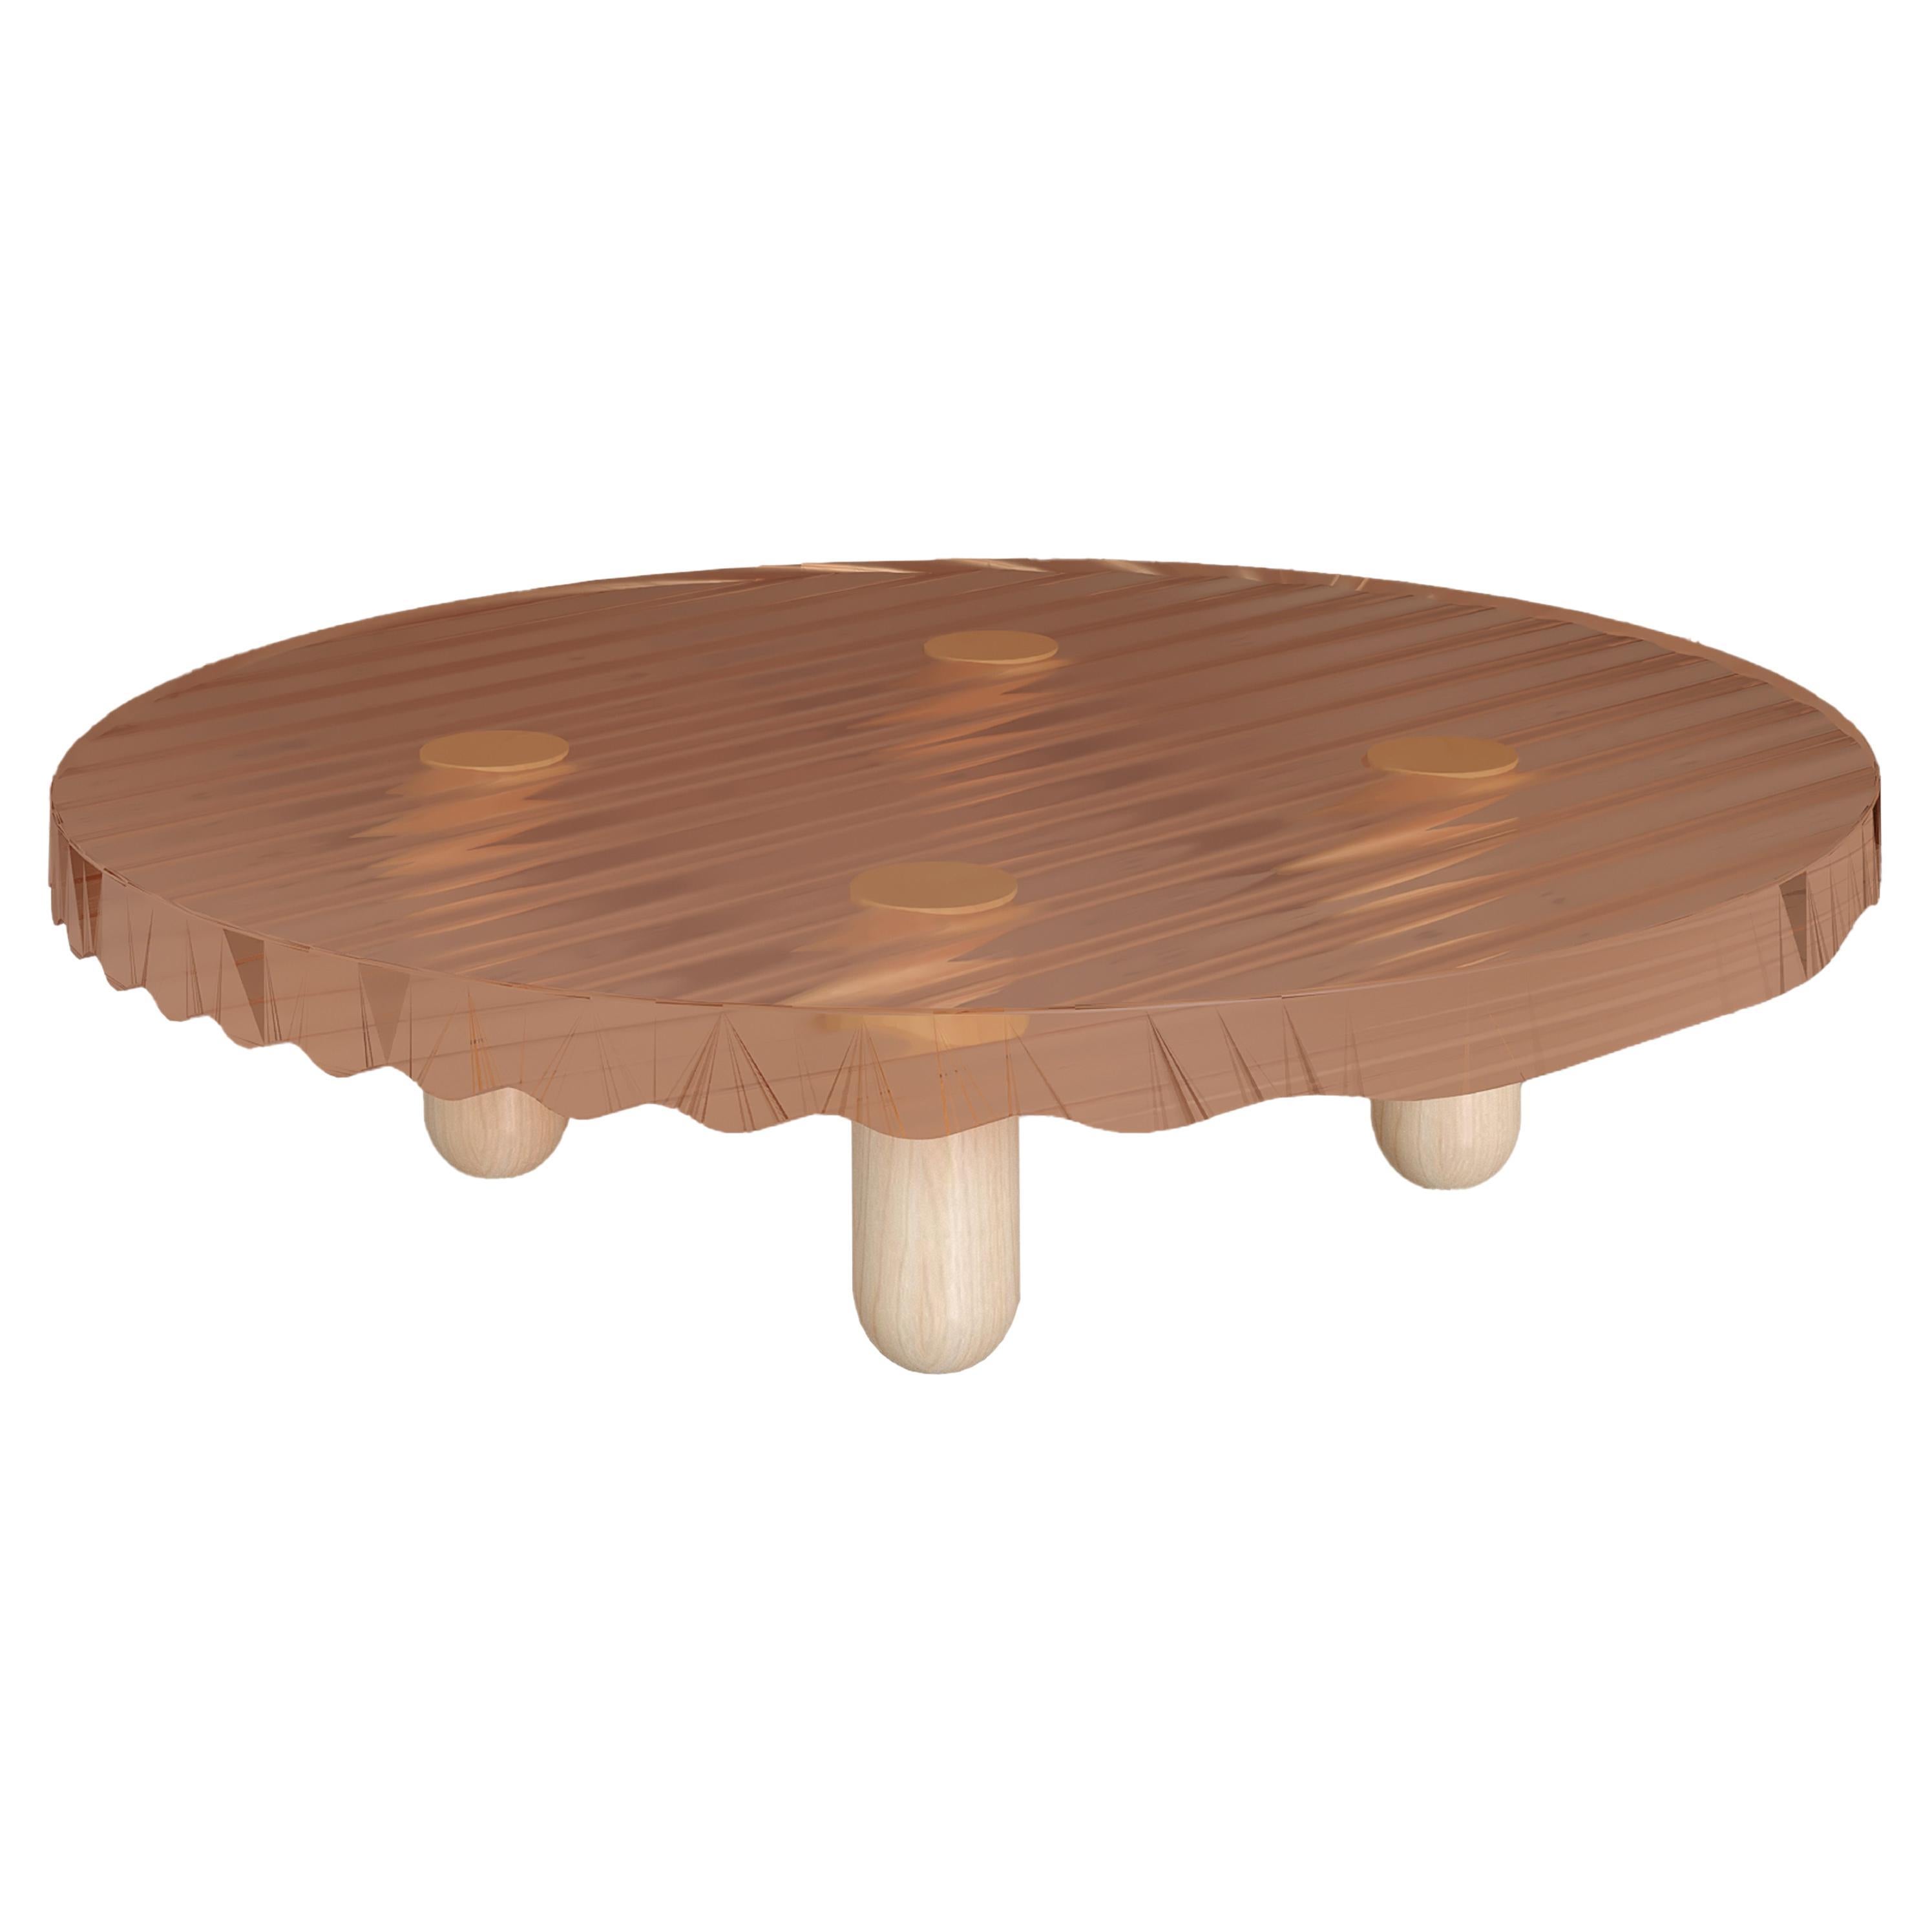 Deep Orange Epoxy Coffee Table with Solid Maple Legs - Coffee Table NAMI For Sale